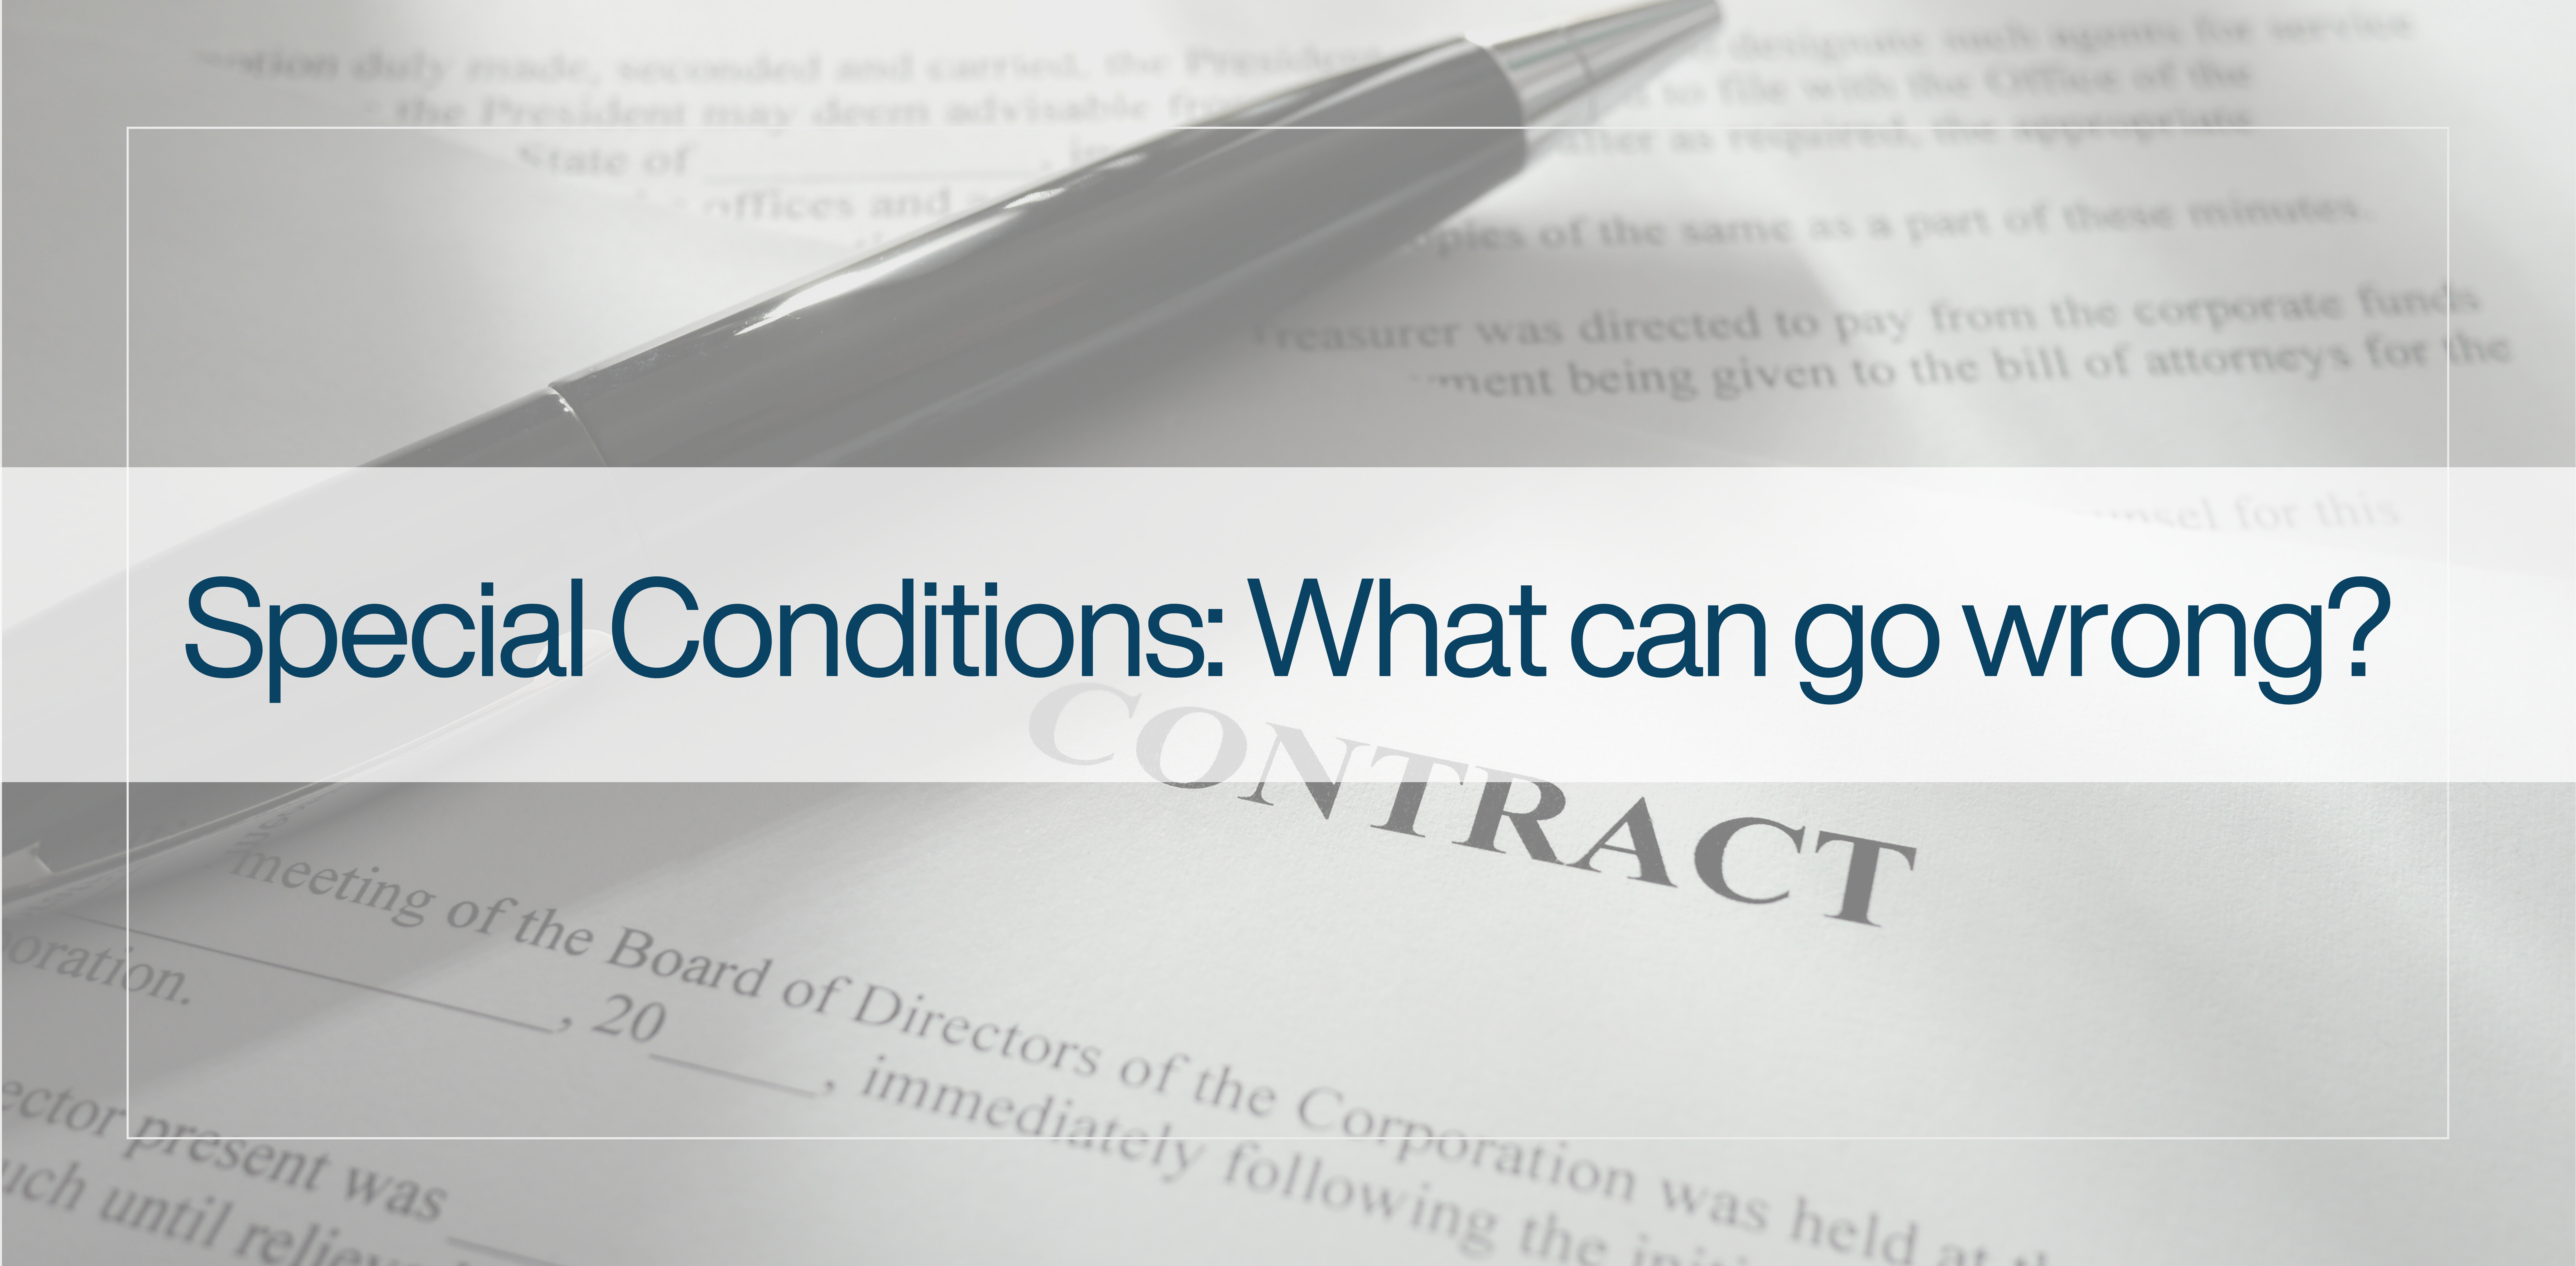 Special Conditions: What can go wrong?